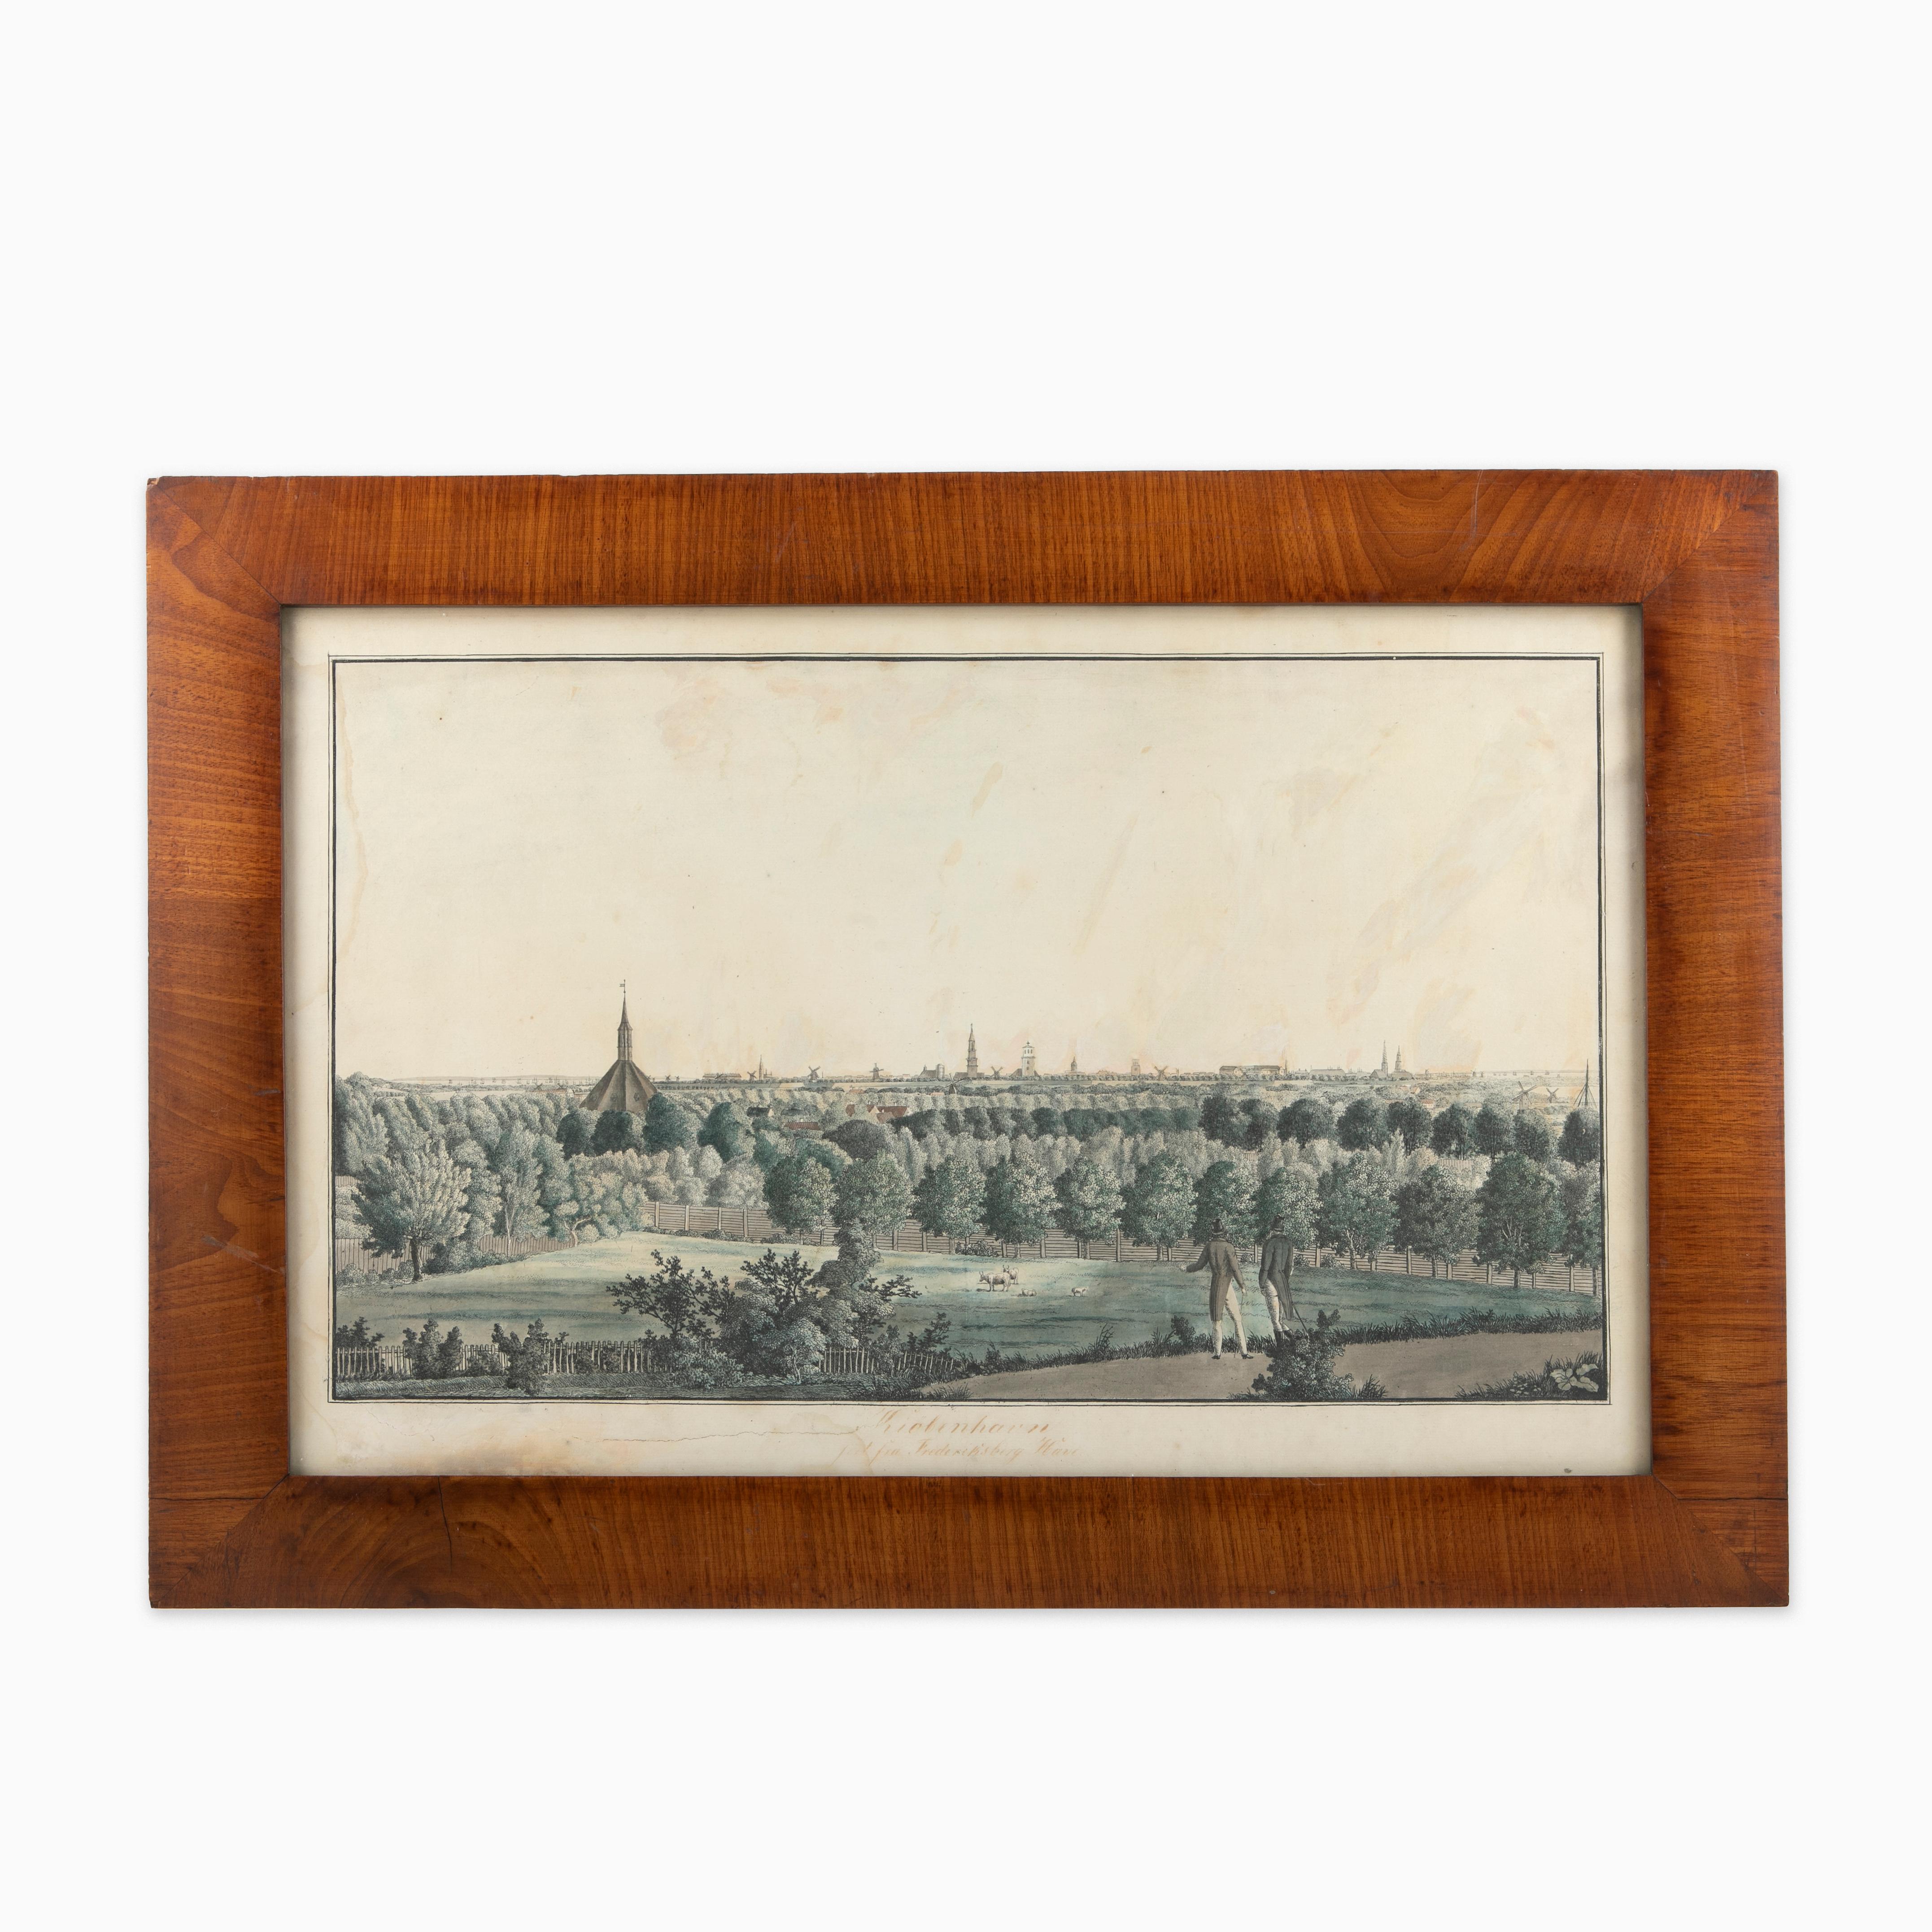 Hand-colored copperplate engraving depicting an interesting old view of Copenhagen seen from Frederiksberg Castle Gardens, approximate. 1790-1800.
Framed in a mahogany frame from same period.
Natural signs associated.

Artwork l: 34 x 36  Frame: 51